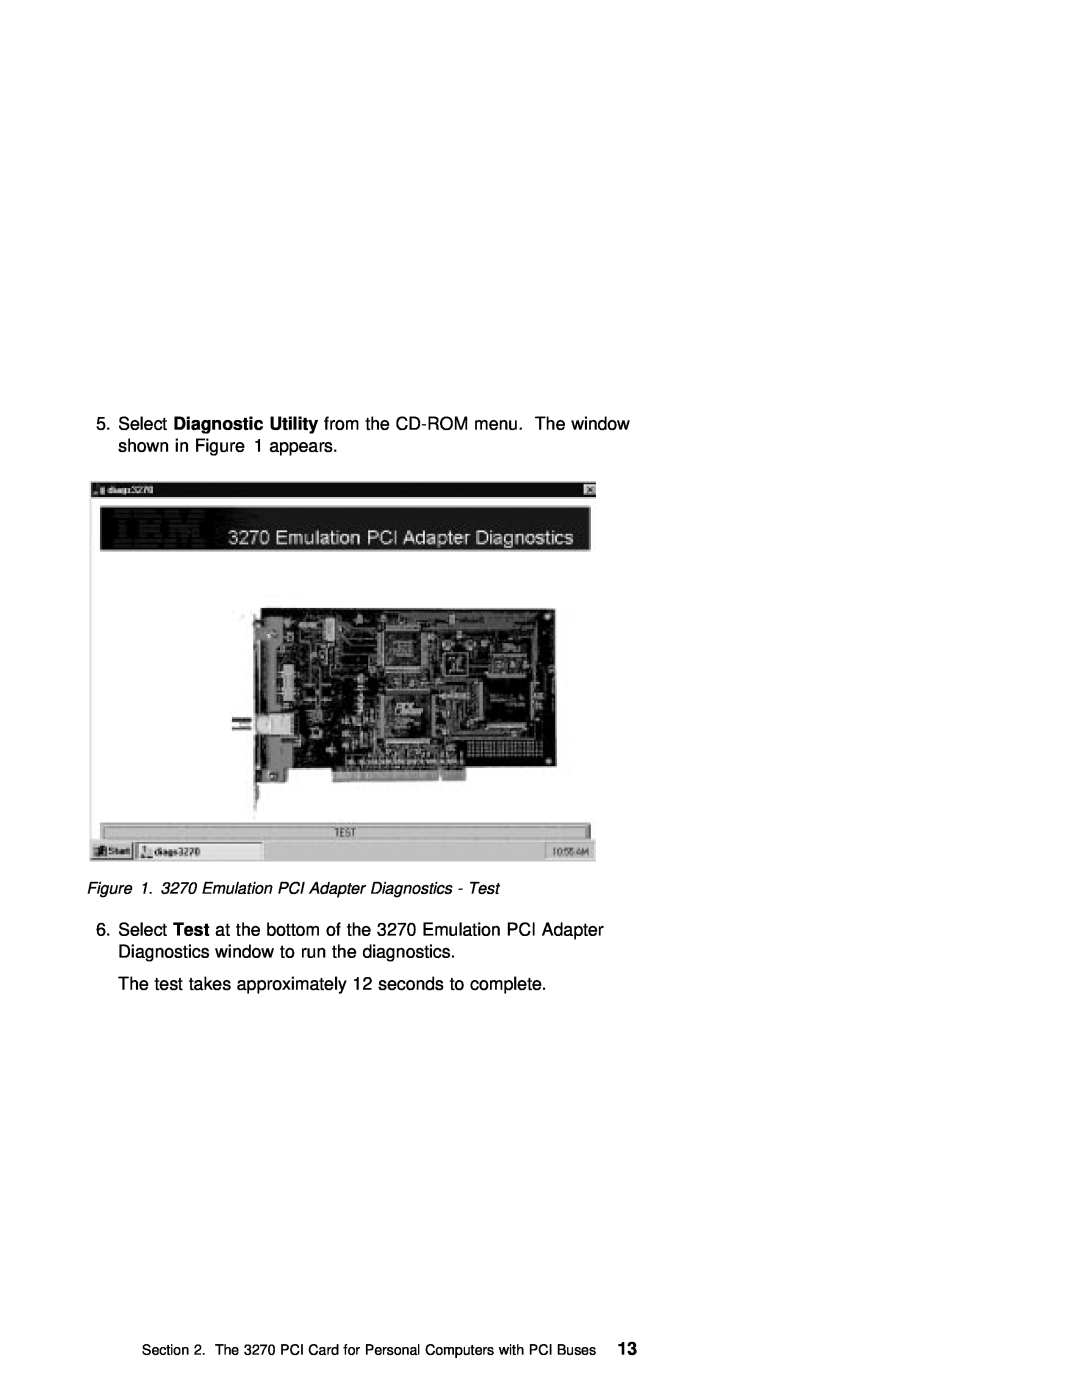 IBM 3270 manual The test takes approximately 12 seconds to complete 